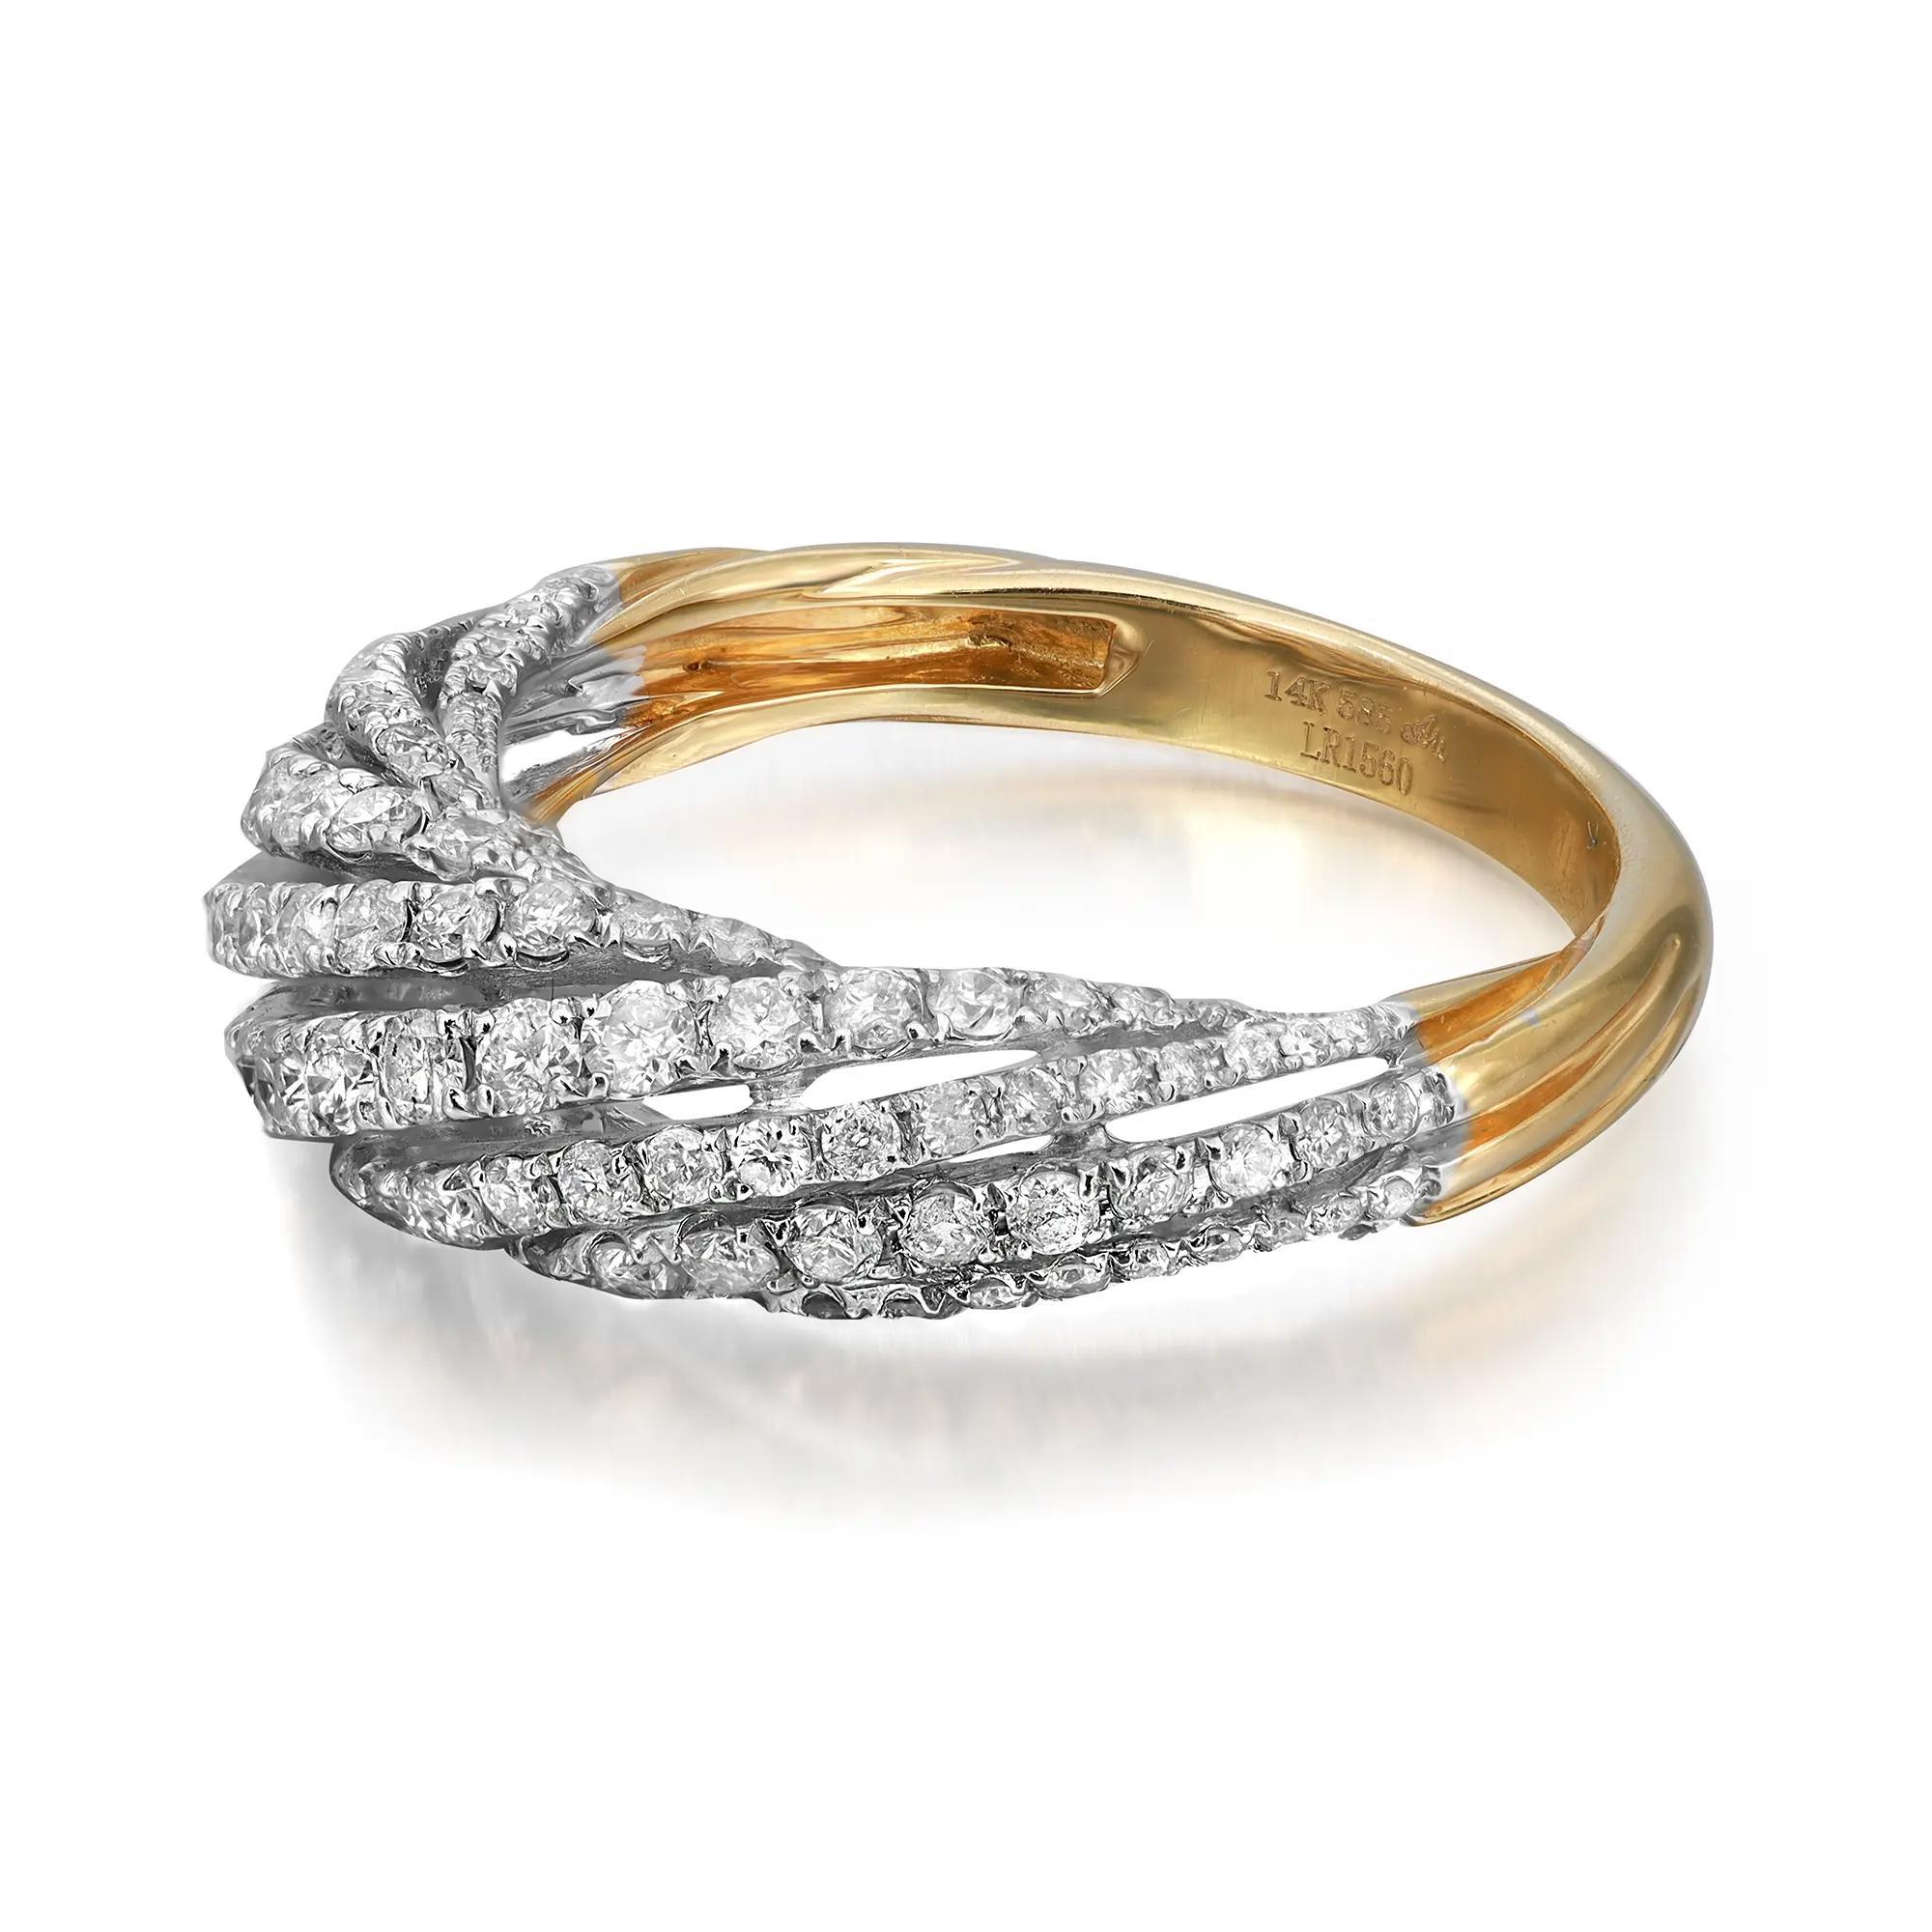 This beautiful dome shaped diamond ring is all about sparkle and glamour. Crafted in high polished 14K yellow gold. It features prong set round brilliant cut diamonds weighing 1.24 carats. Diamond quality: I color and SI clarity. Ring size 7.25. Top